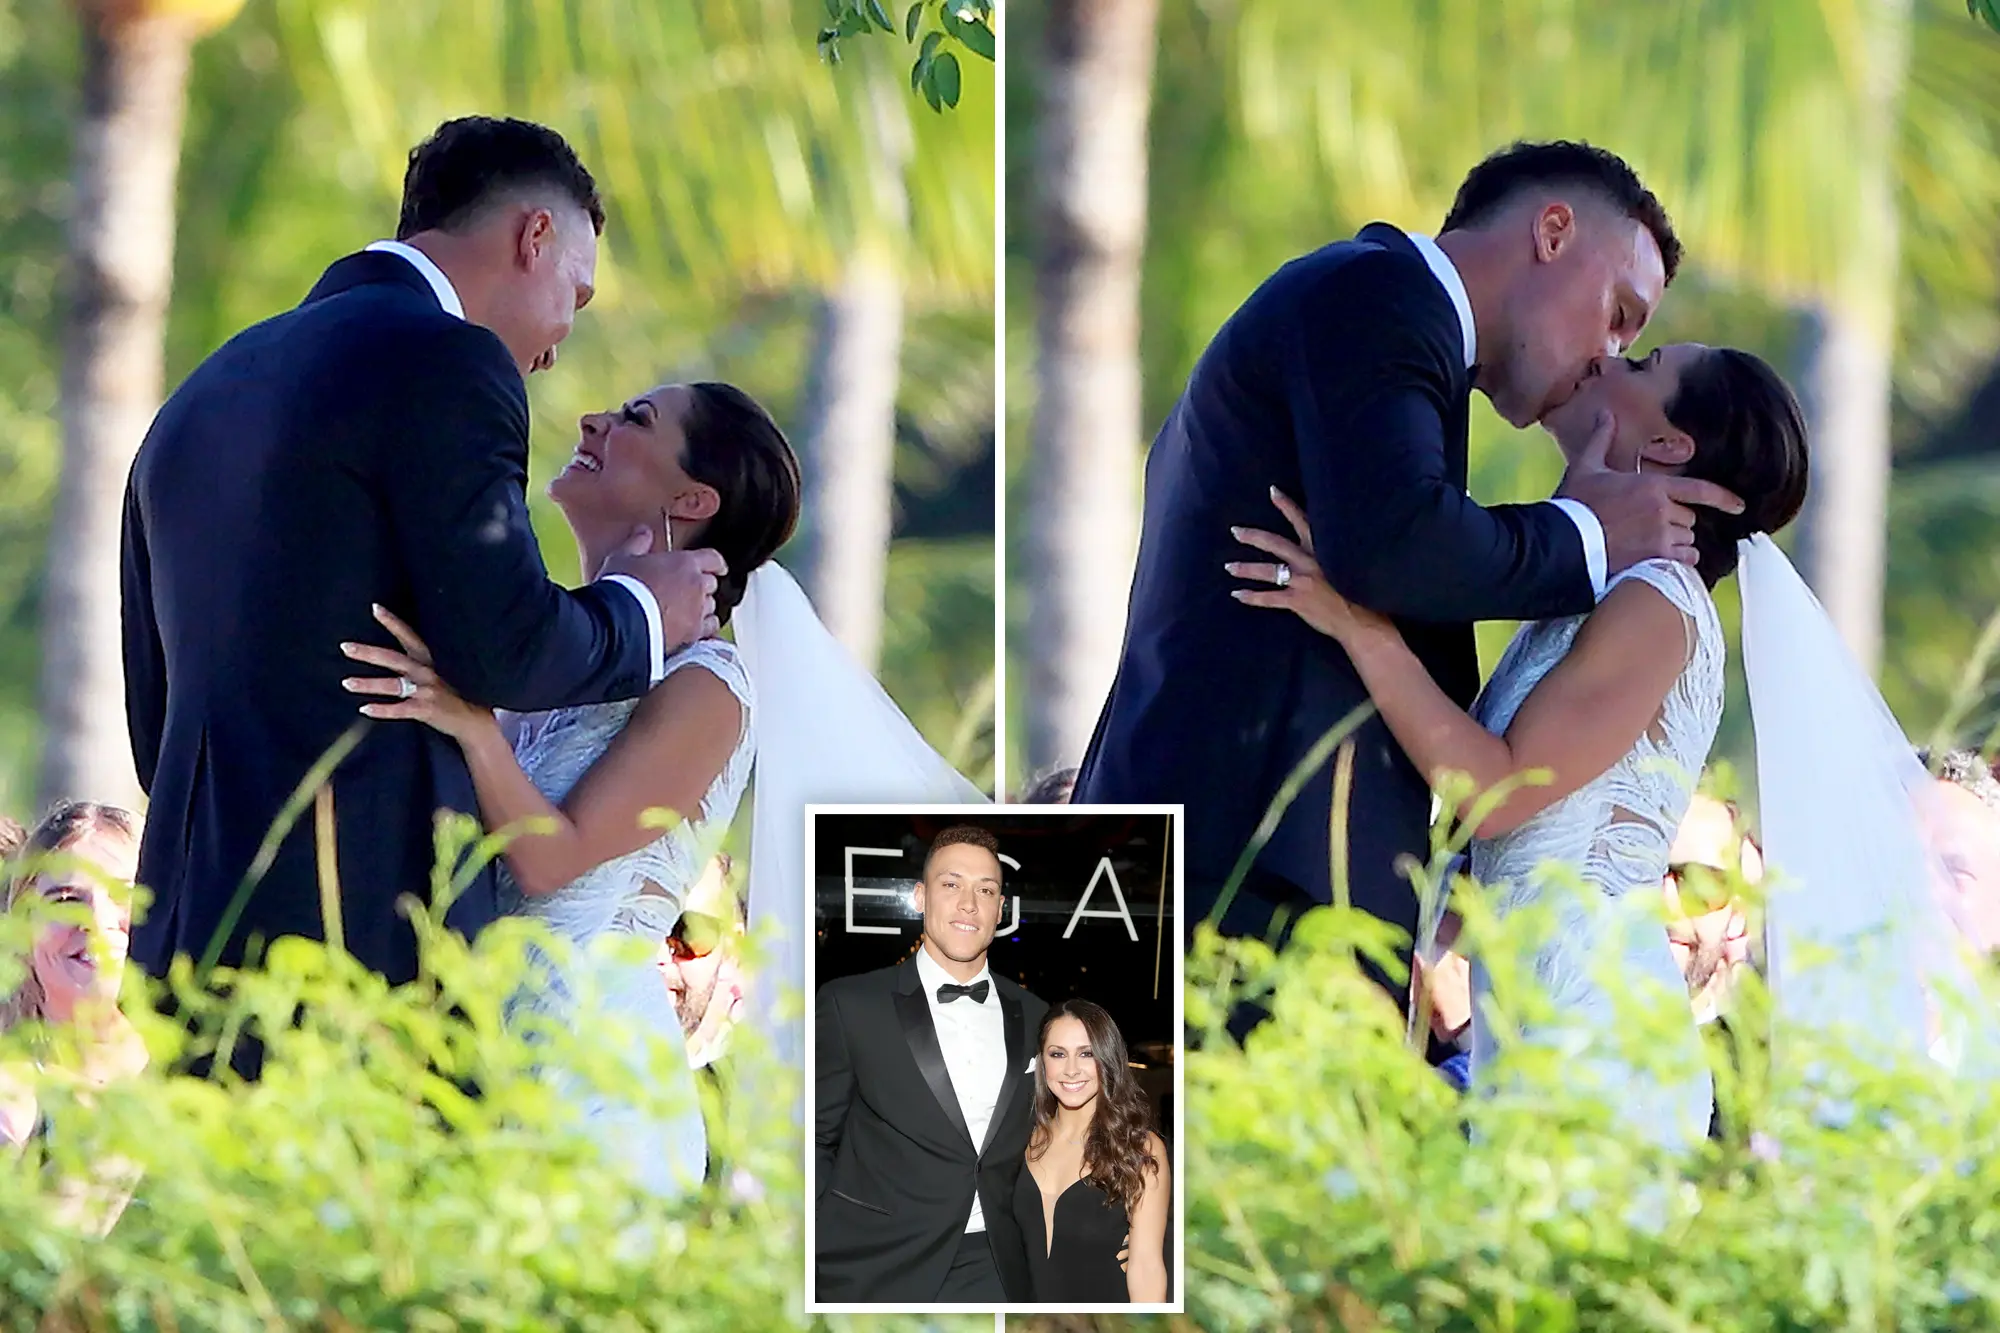 What a Joyous Celebration: New Yankees Star Aaron Judge Marries Long-Time Love